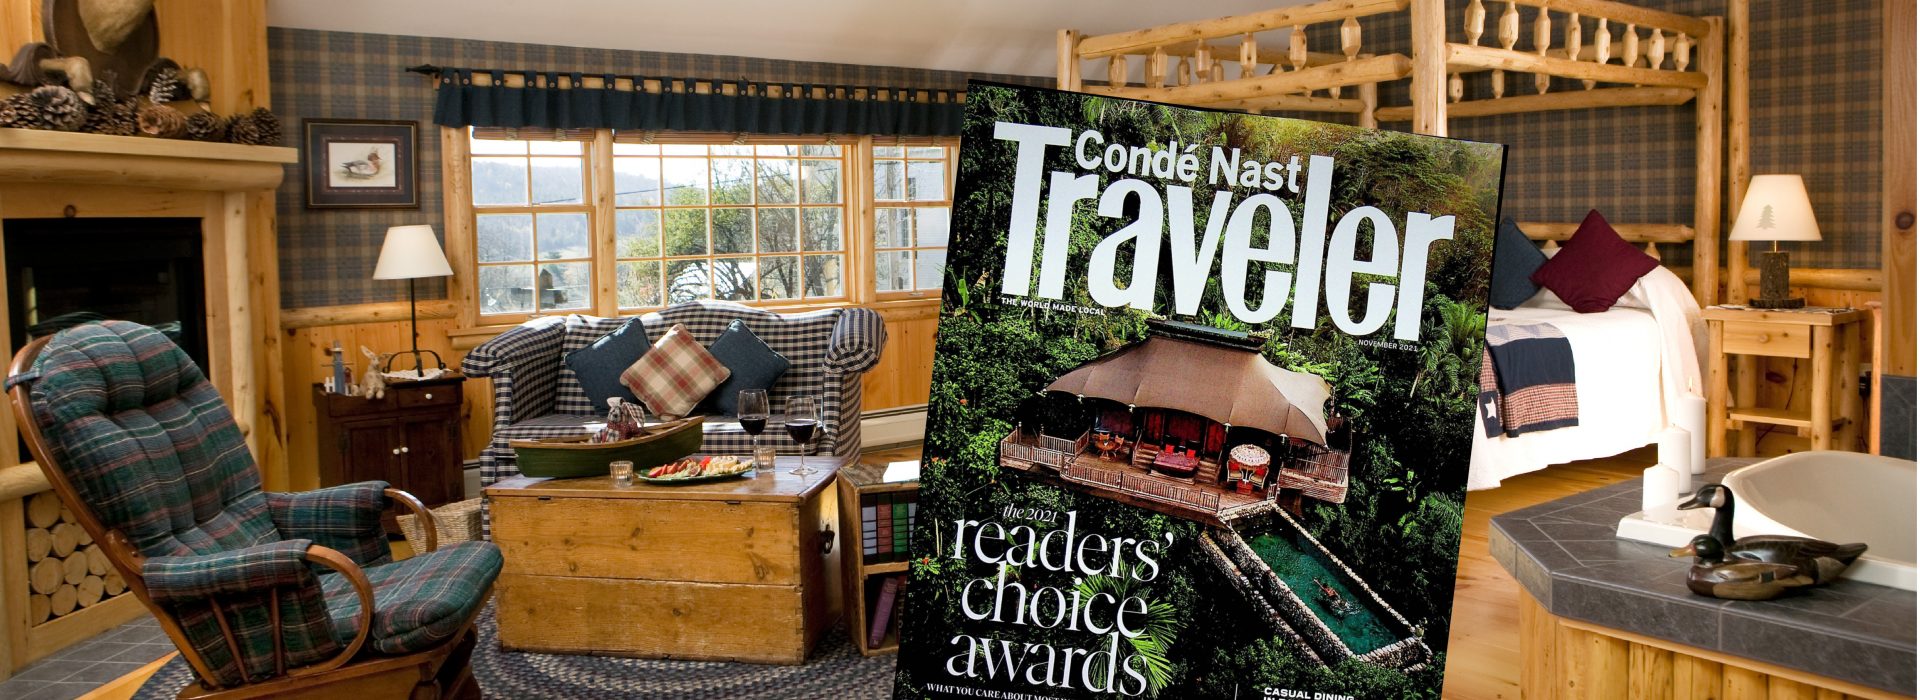 Conde Nast magazine cover November 2021 issue featuring Readers Choice Awards